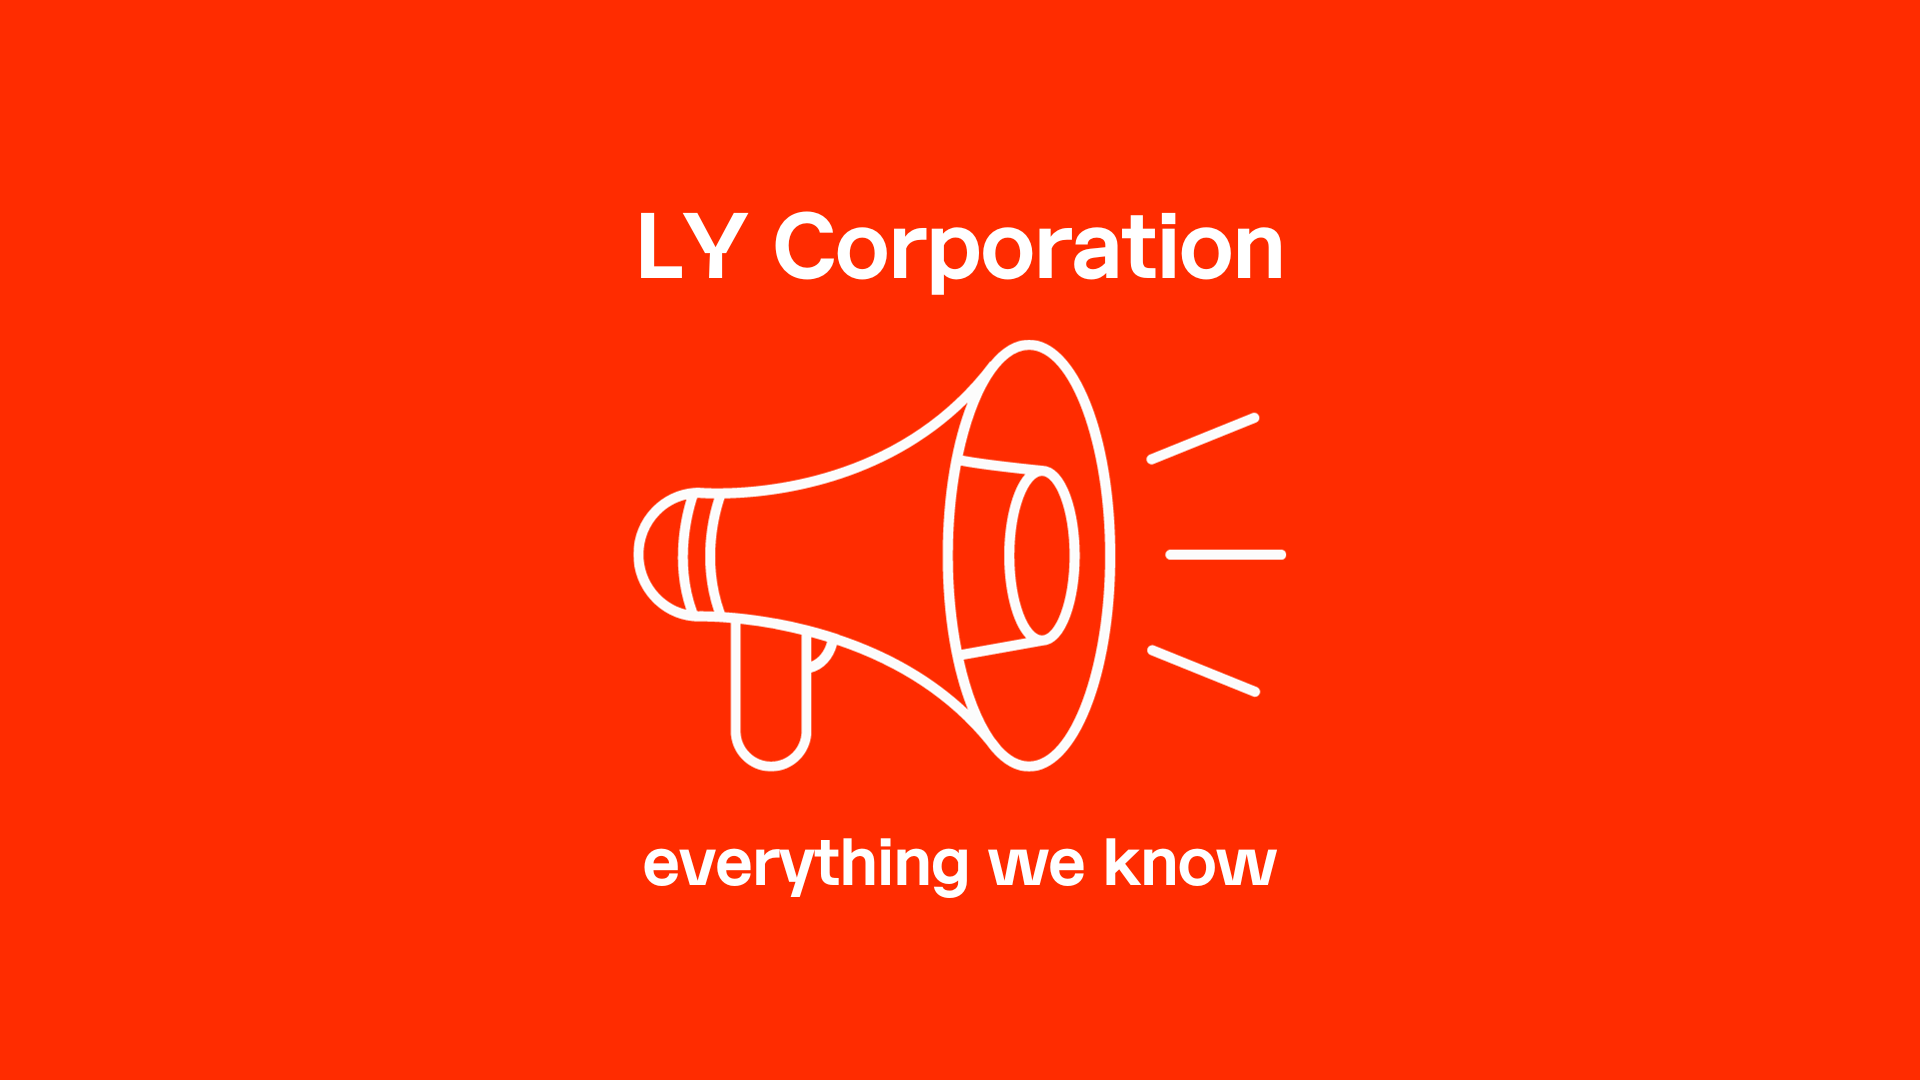 LY Corporation - everything we know